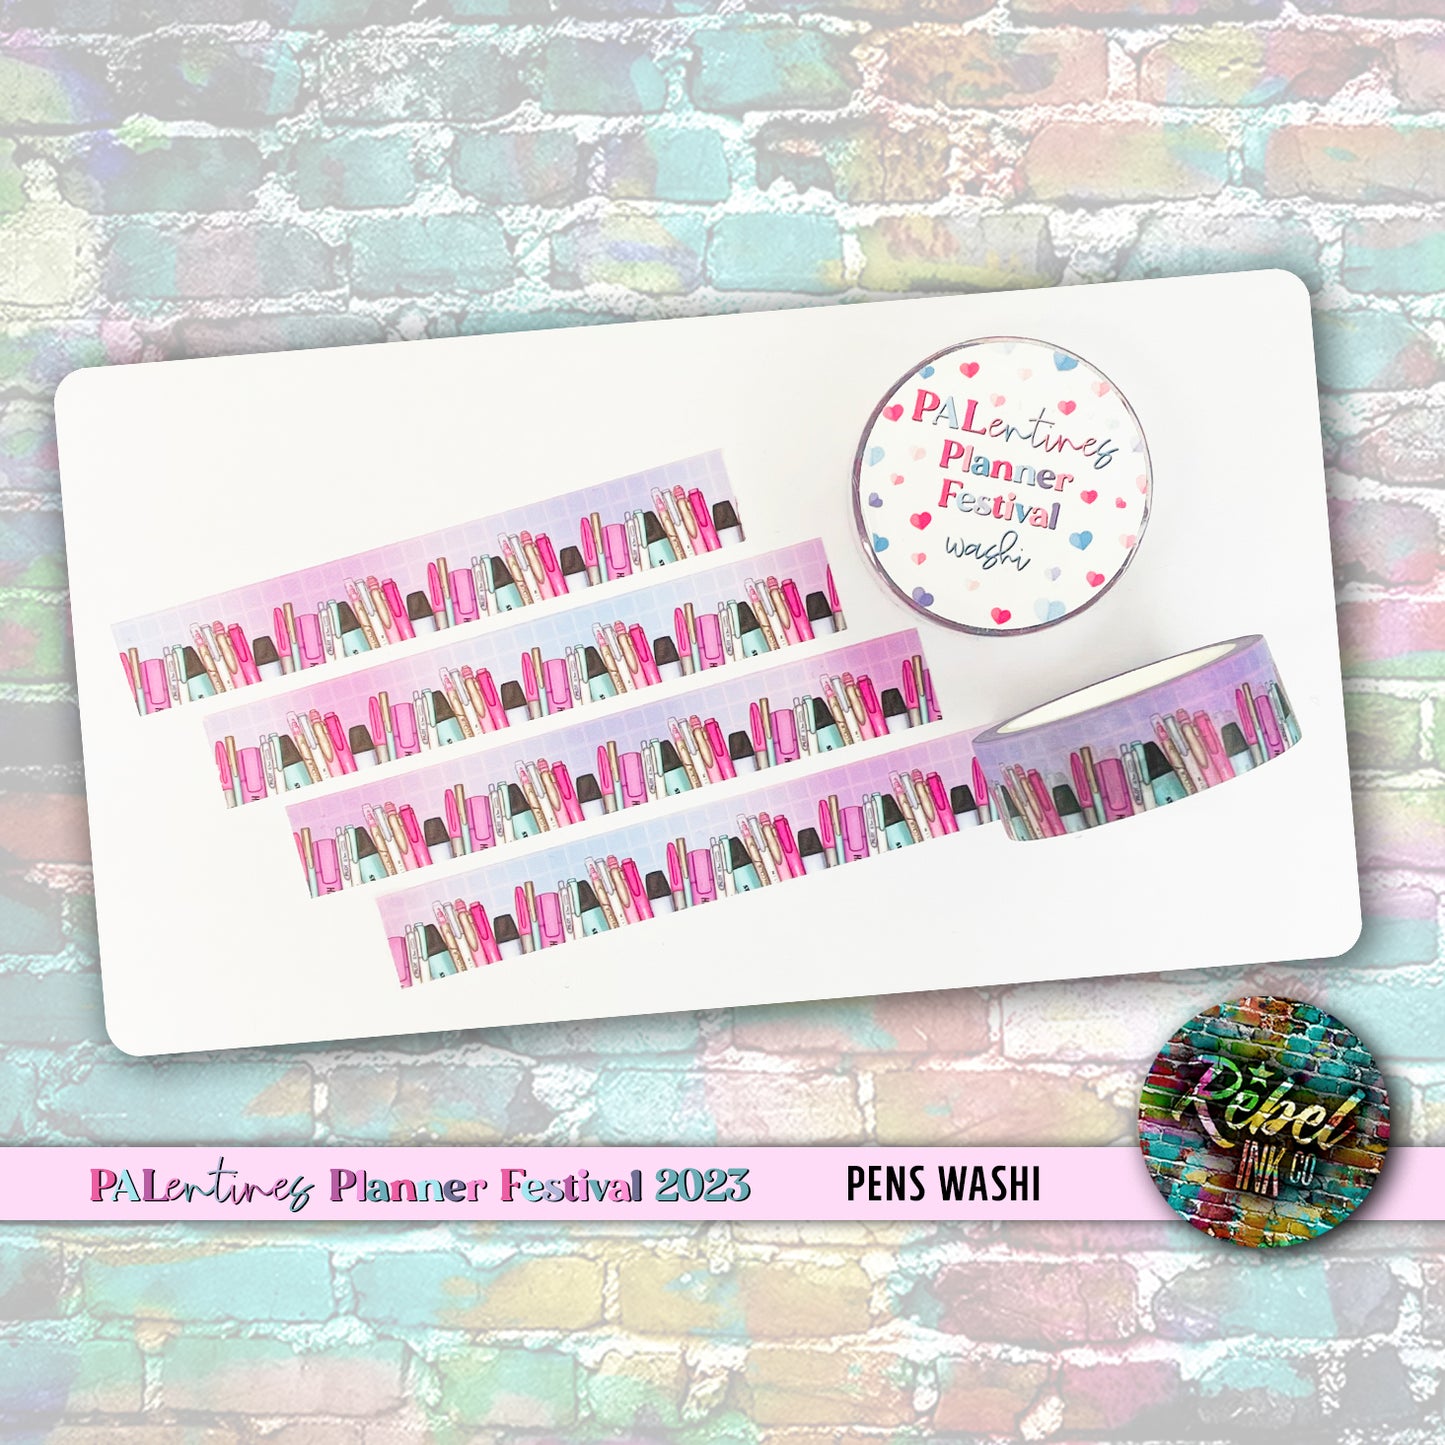 Palentines Planner Festival OFFICIAL - Pens Washi